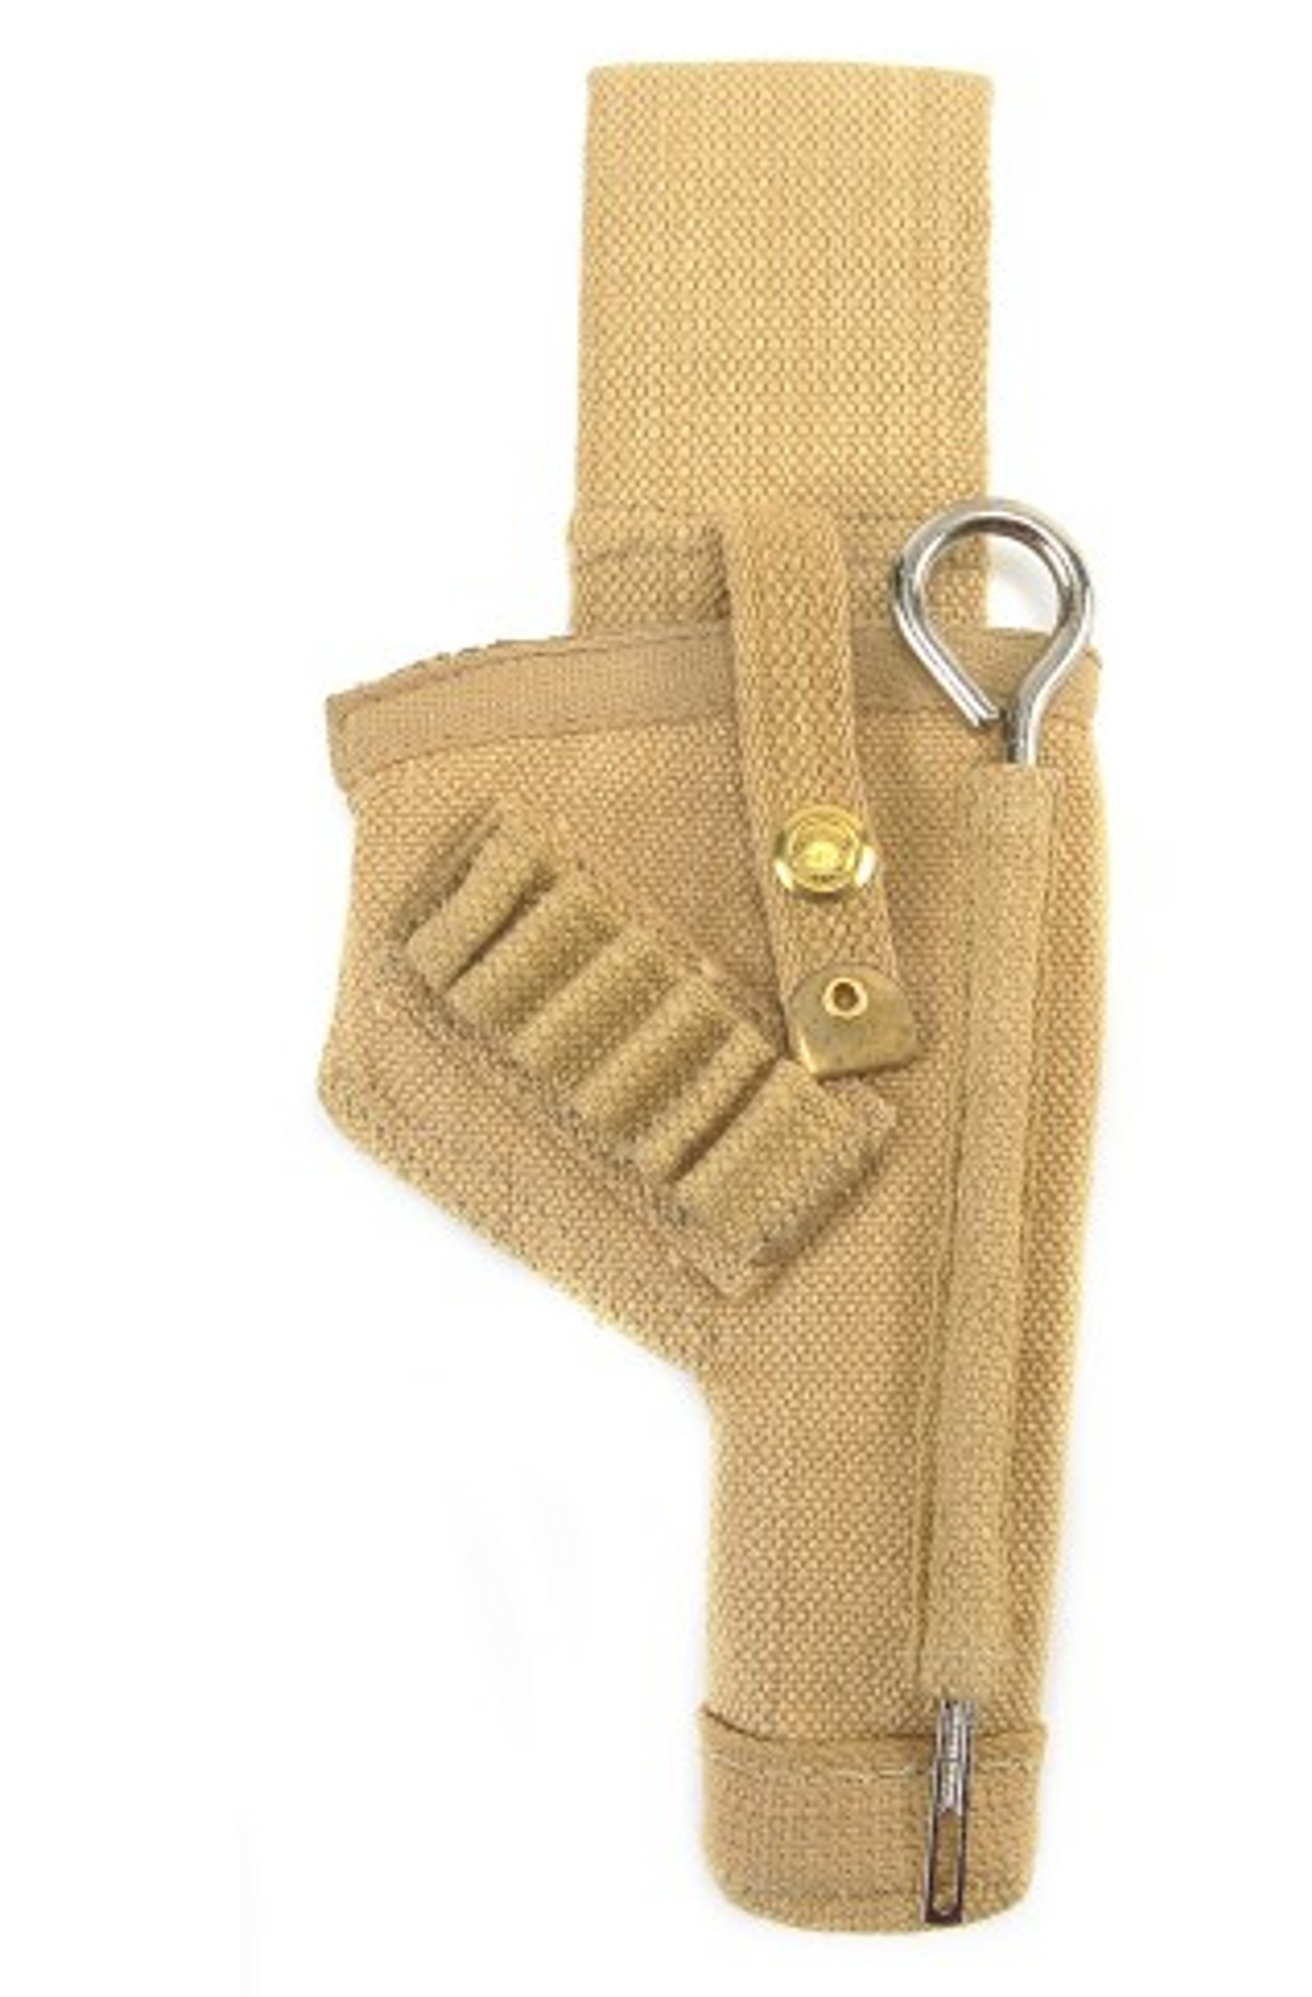 British Tanker 38 Webley Canvas Holster w/Shell Loops & Cleaning Rod Marked JT&L 1940